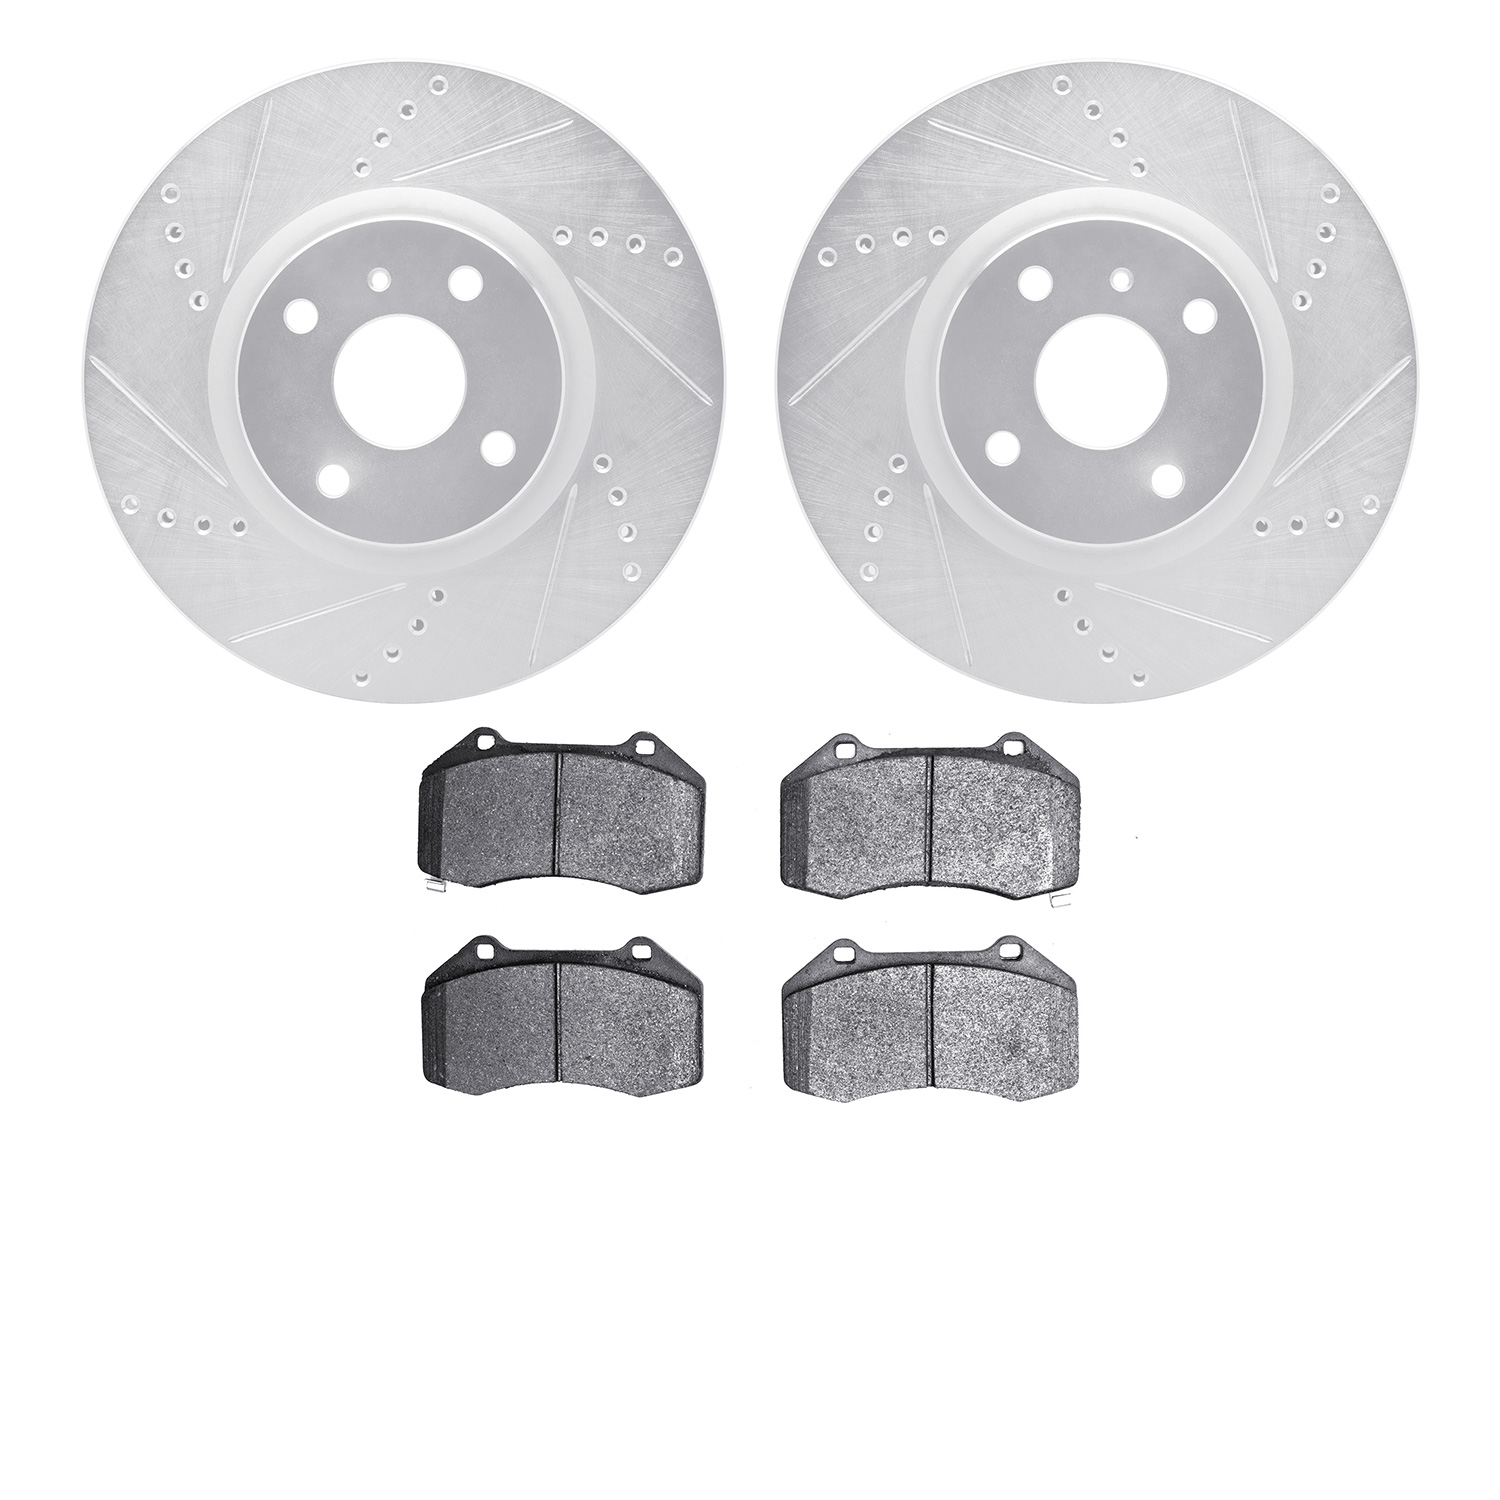 7302-80071 Drilled/Slotted Brake Rotor with 3000-Series Ceramic Brake Pads Kit [Silver], Fits Select Multiple Makes/Models, Posi